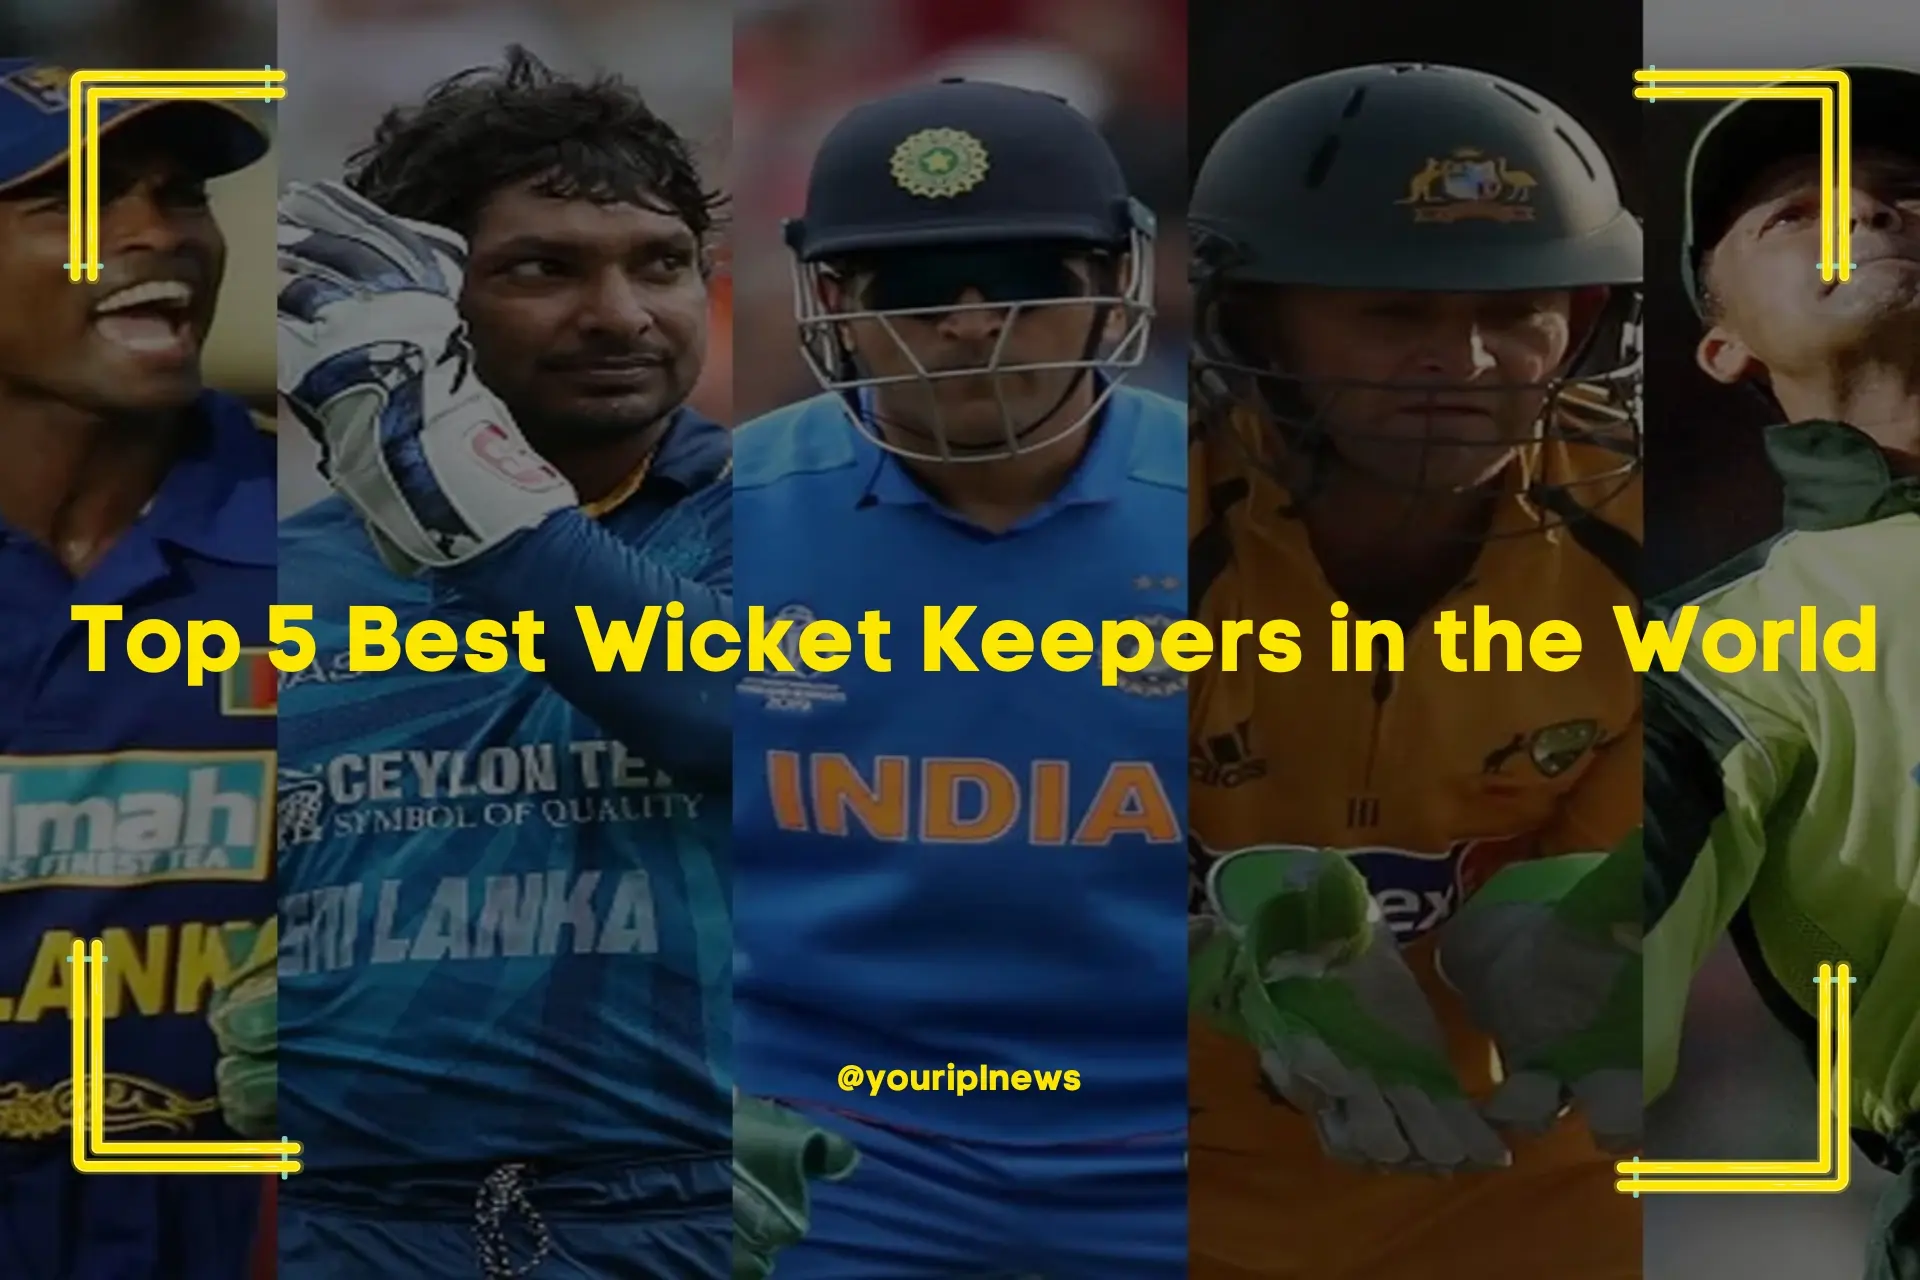 Top 5 Best Wicket Keepers in the World